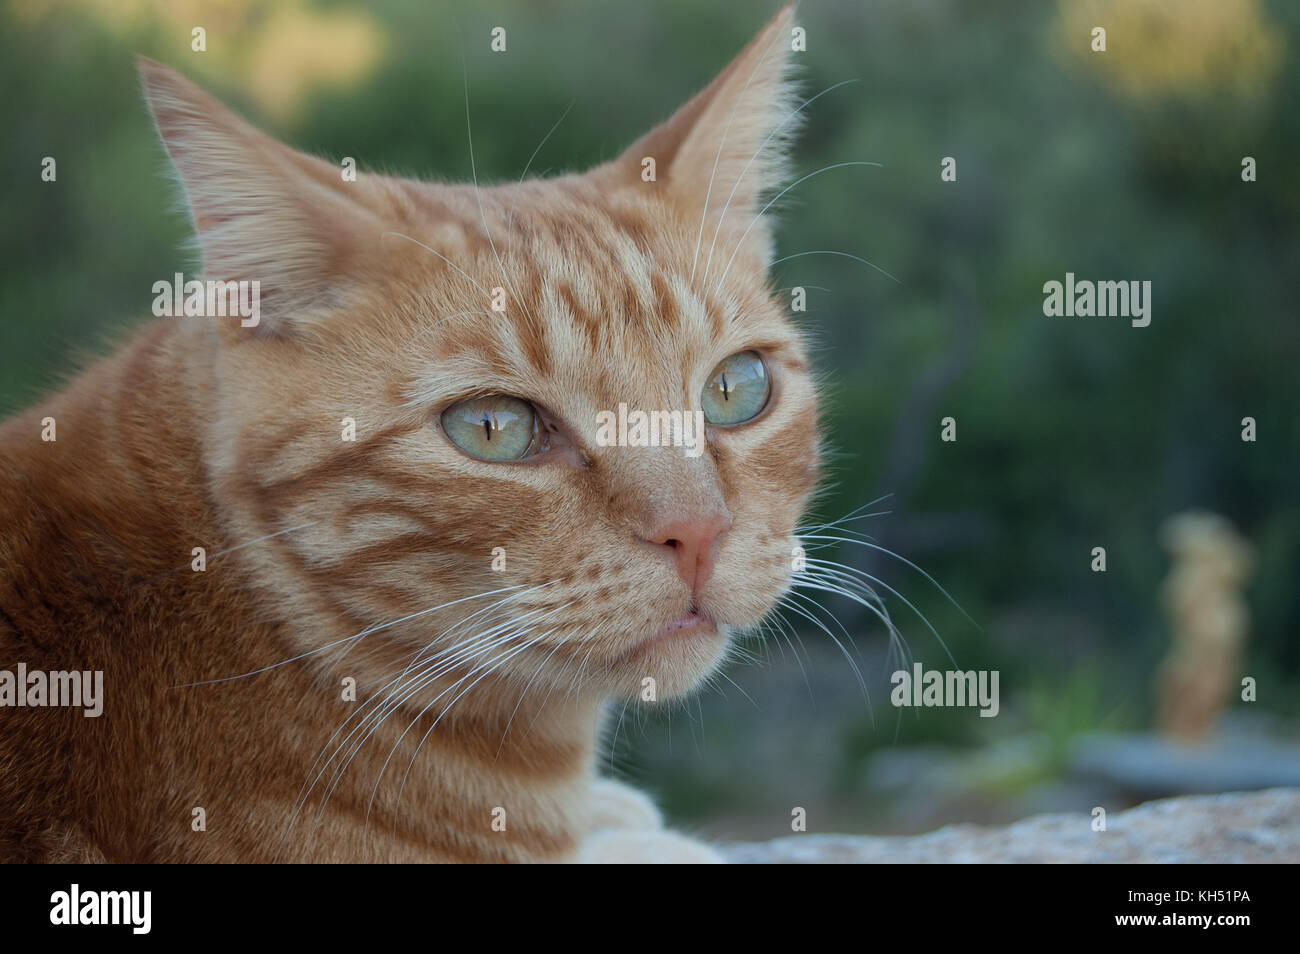 Close-up head shot of ginger cat outdoors Stock Photo